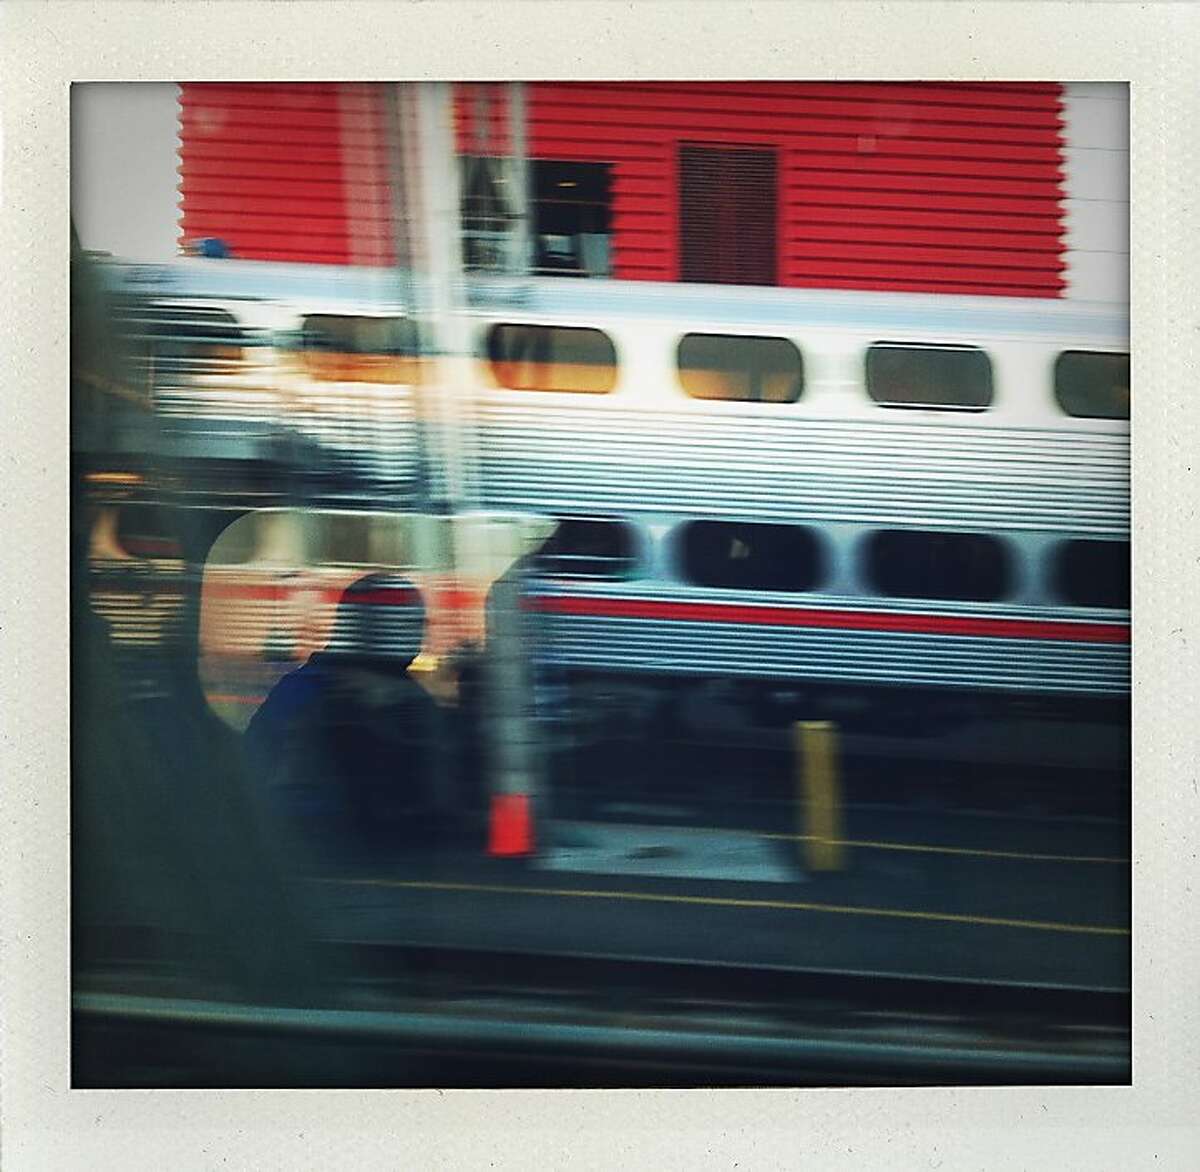 "Cal's Train" - Reflection on a window while leaving the northern terminus of Caltrain, looking west.